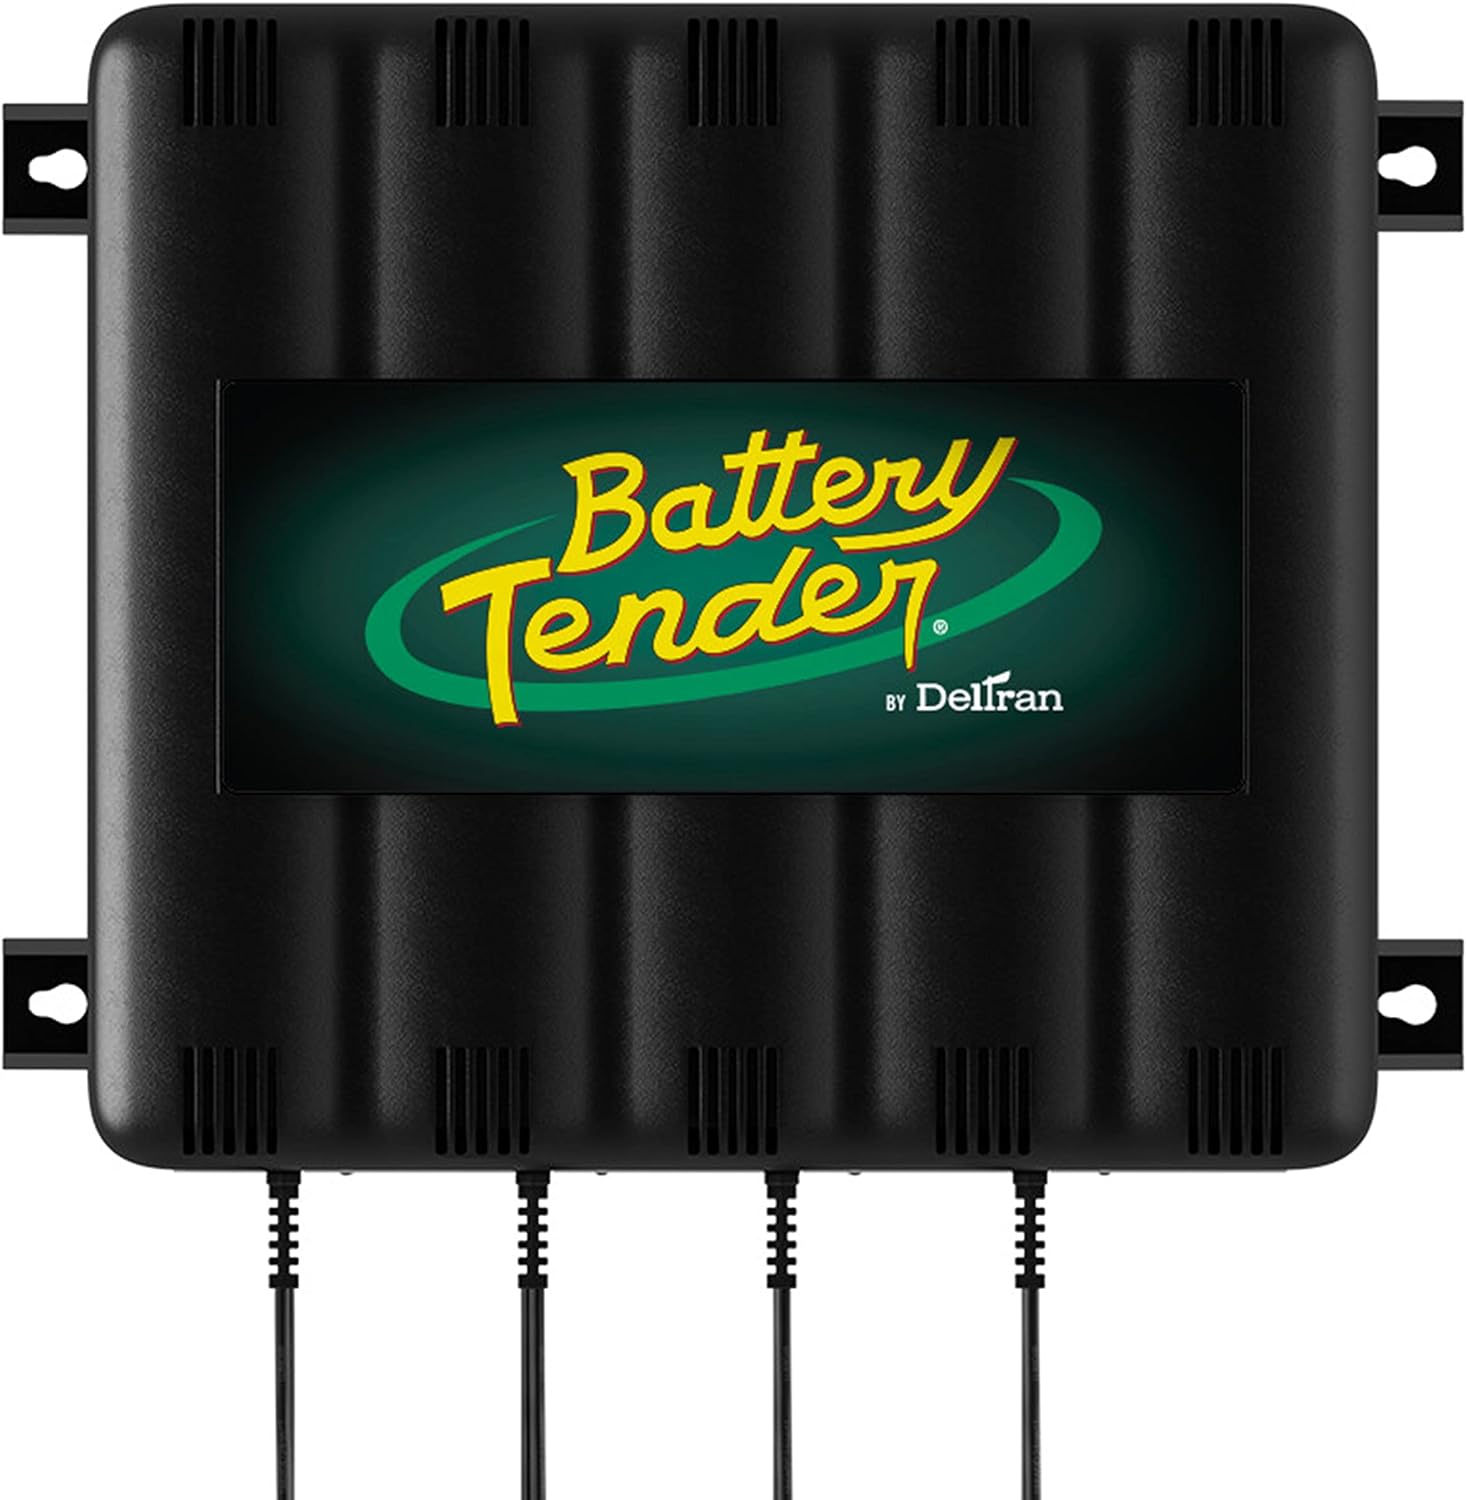 Battery Tender 4 Bank Battery Charger and Maintainer, 12 Volt 1.25 AMP for Motorcycles, ATVs, Lawn Mowers - Battery Tender 4 Bank Charger Review